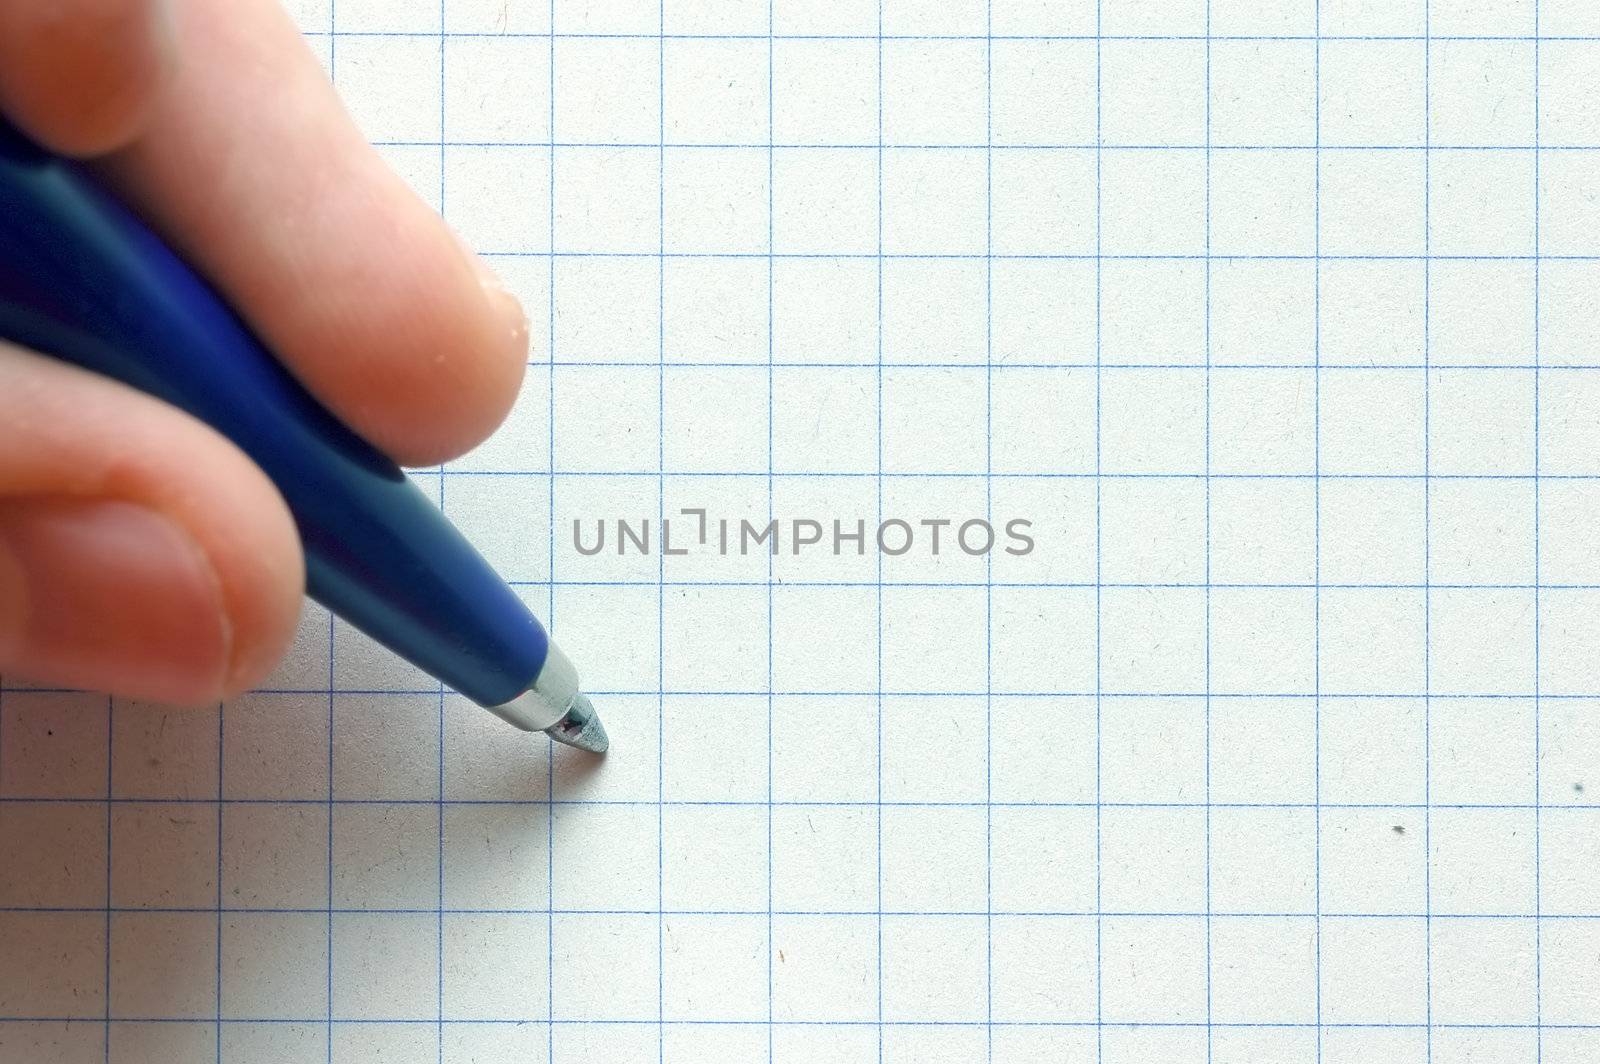 Writing a message - blank piece of paper. Background ready to use!